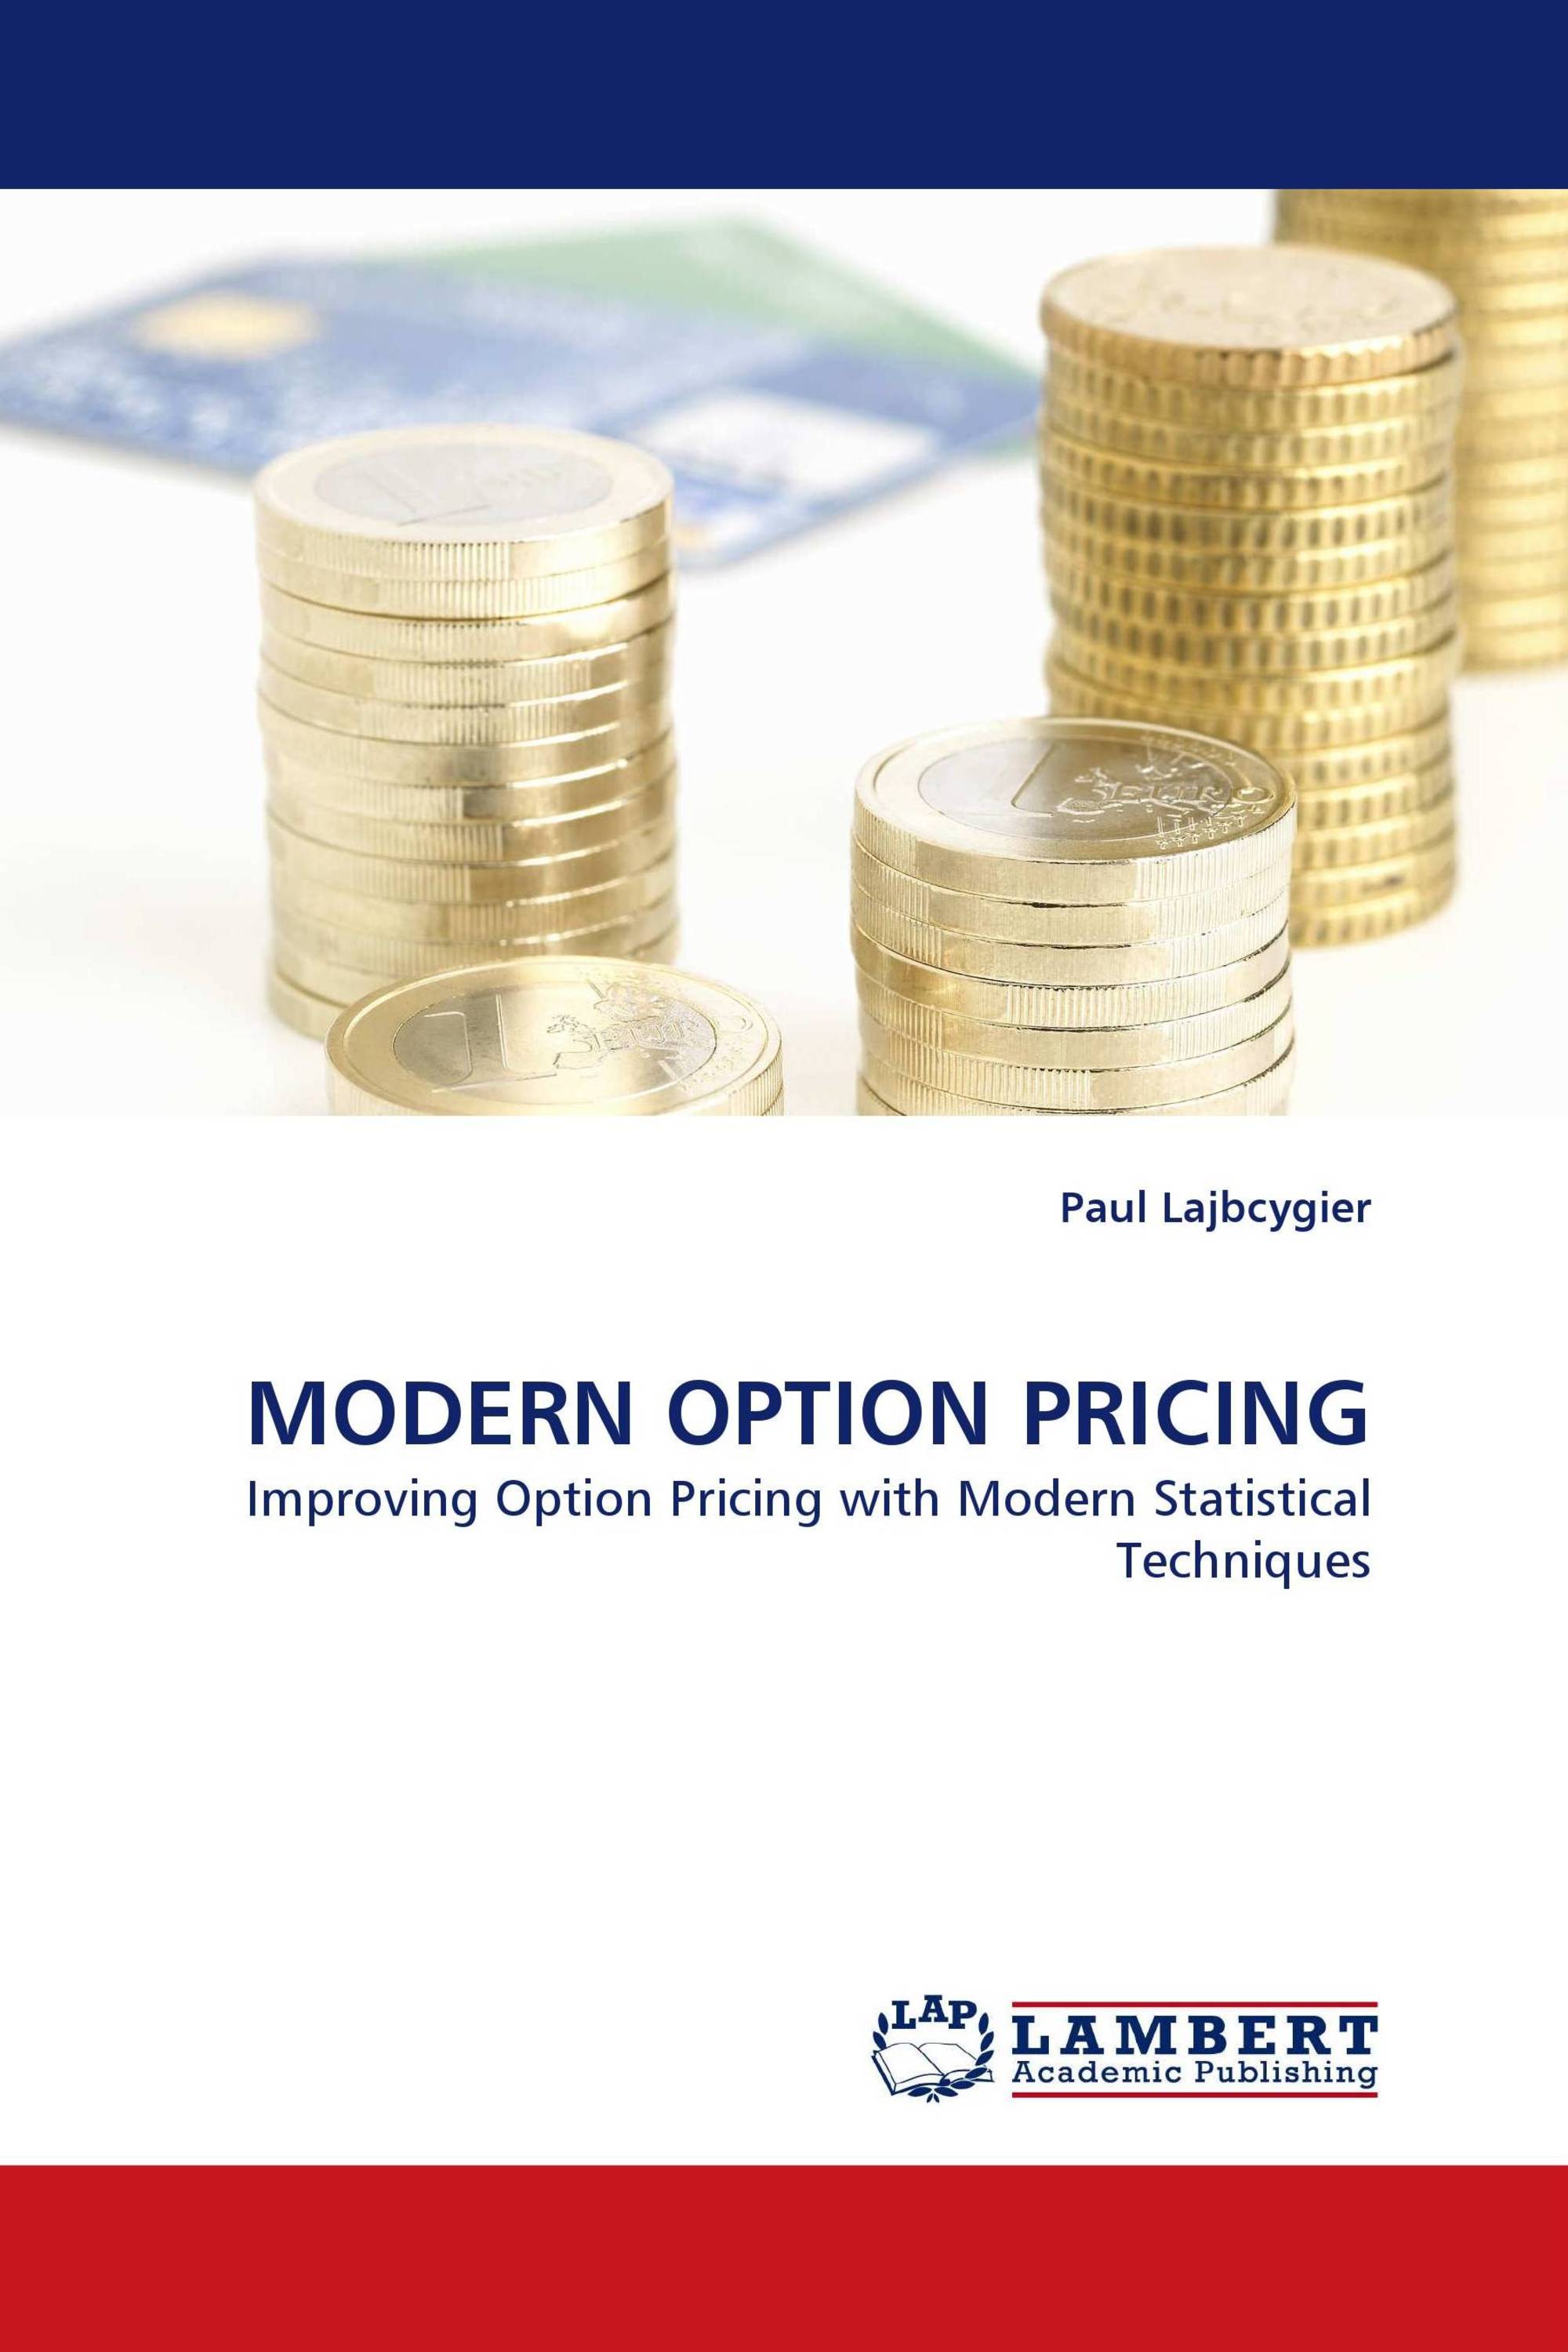 thesis option pricing